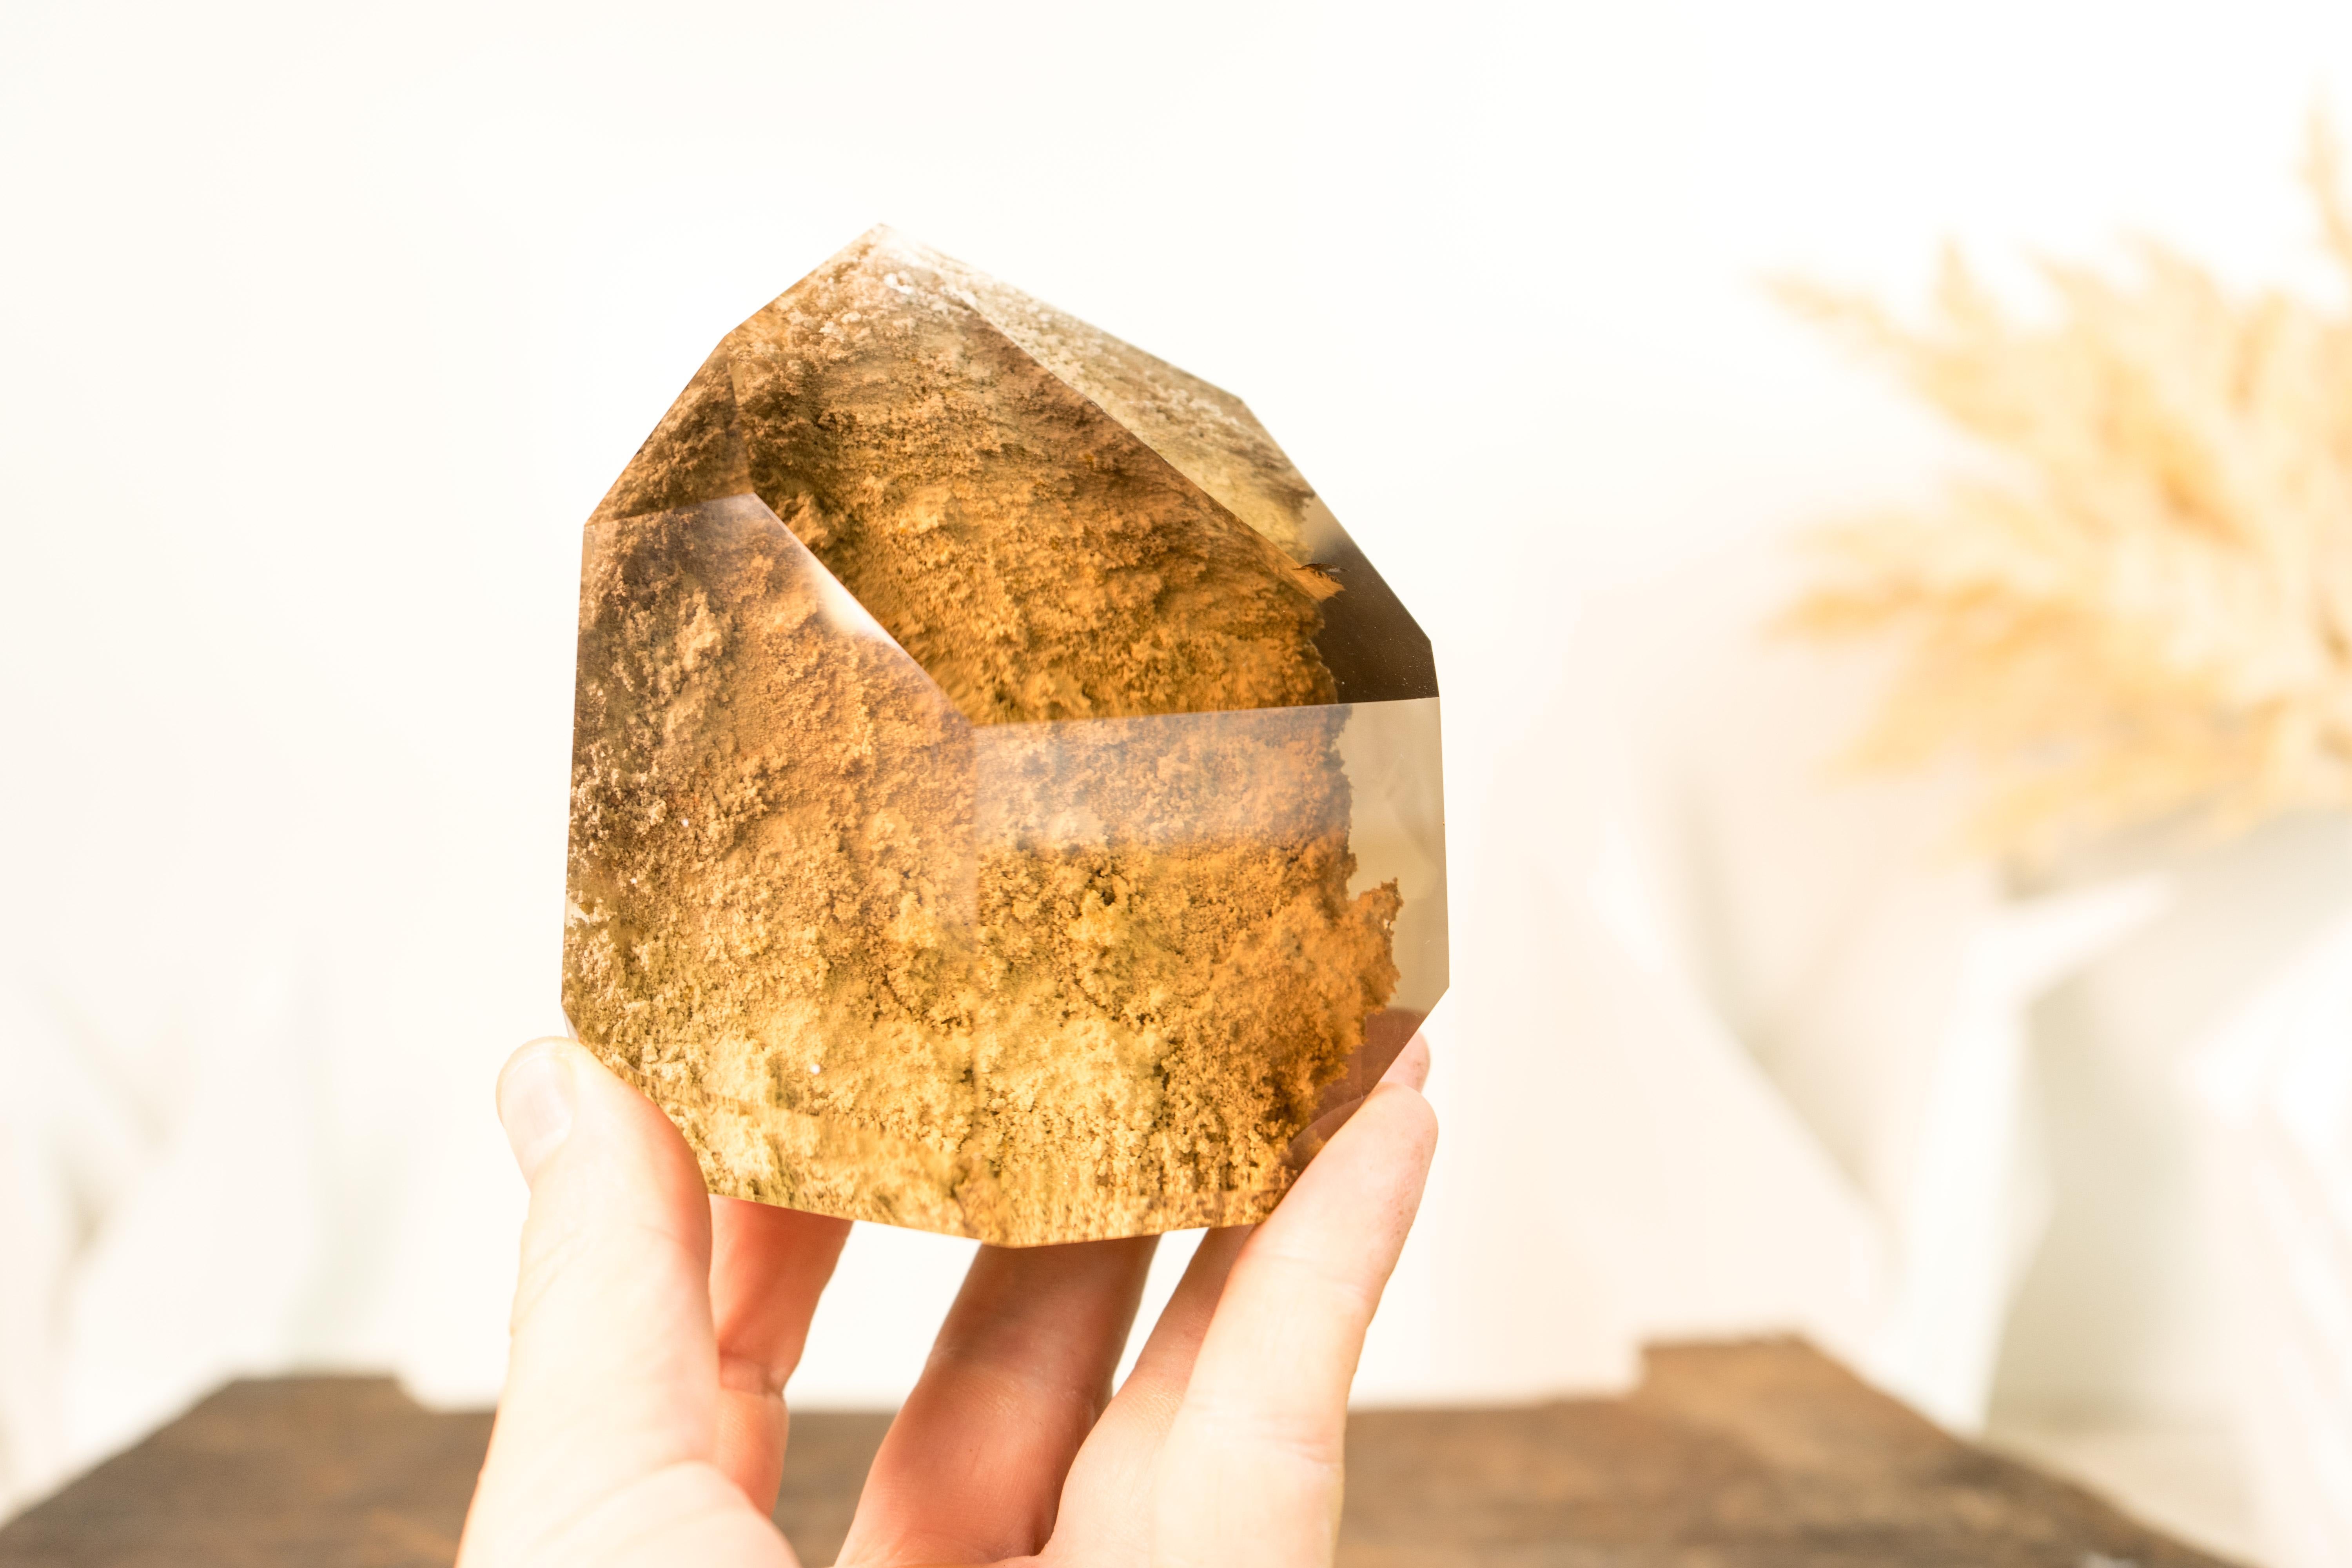 A play of contrasts: the old and the new, the raw and the polished. This Smoky Citrine Quartz offers a window to the past, encapsulating a landscape within a crystal, where the landscaped garden quartz can be fully appreciated through a window of